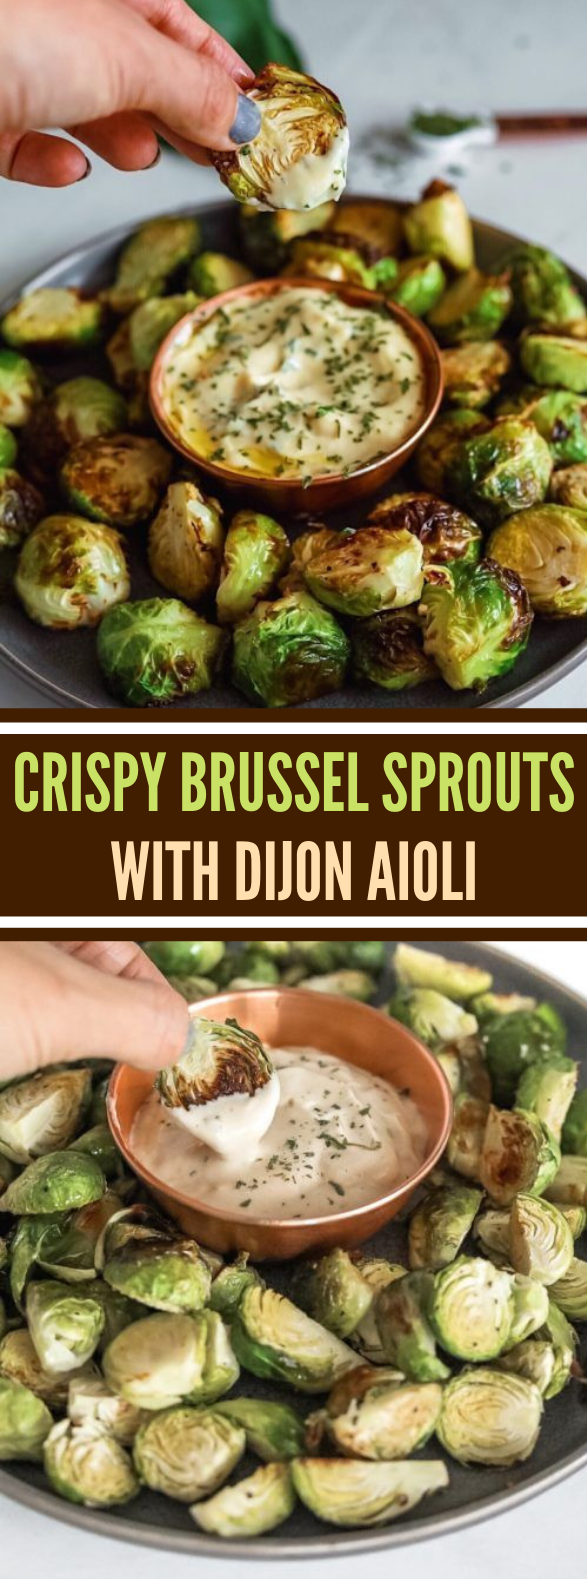 CRISPY BRUSSEL SPROUTS WITH DIJON AIOLI #vegetarian #dippingsauce